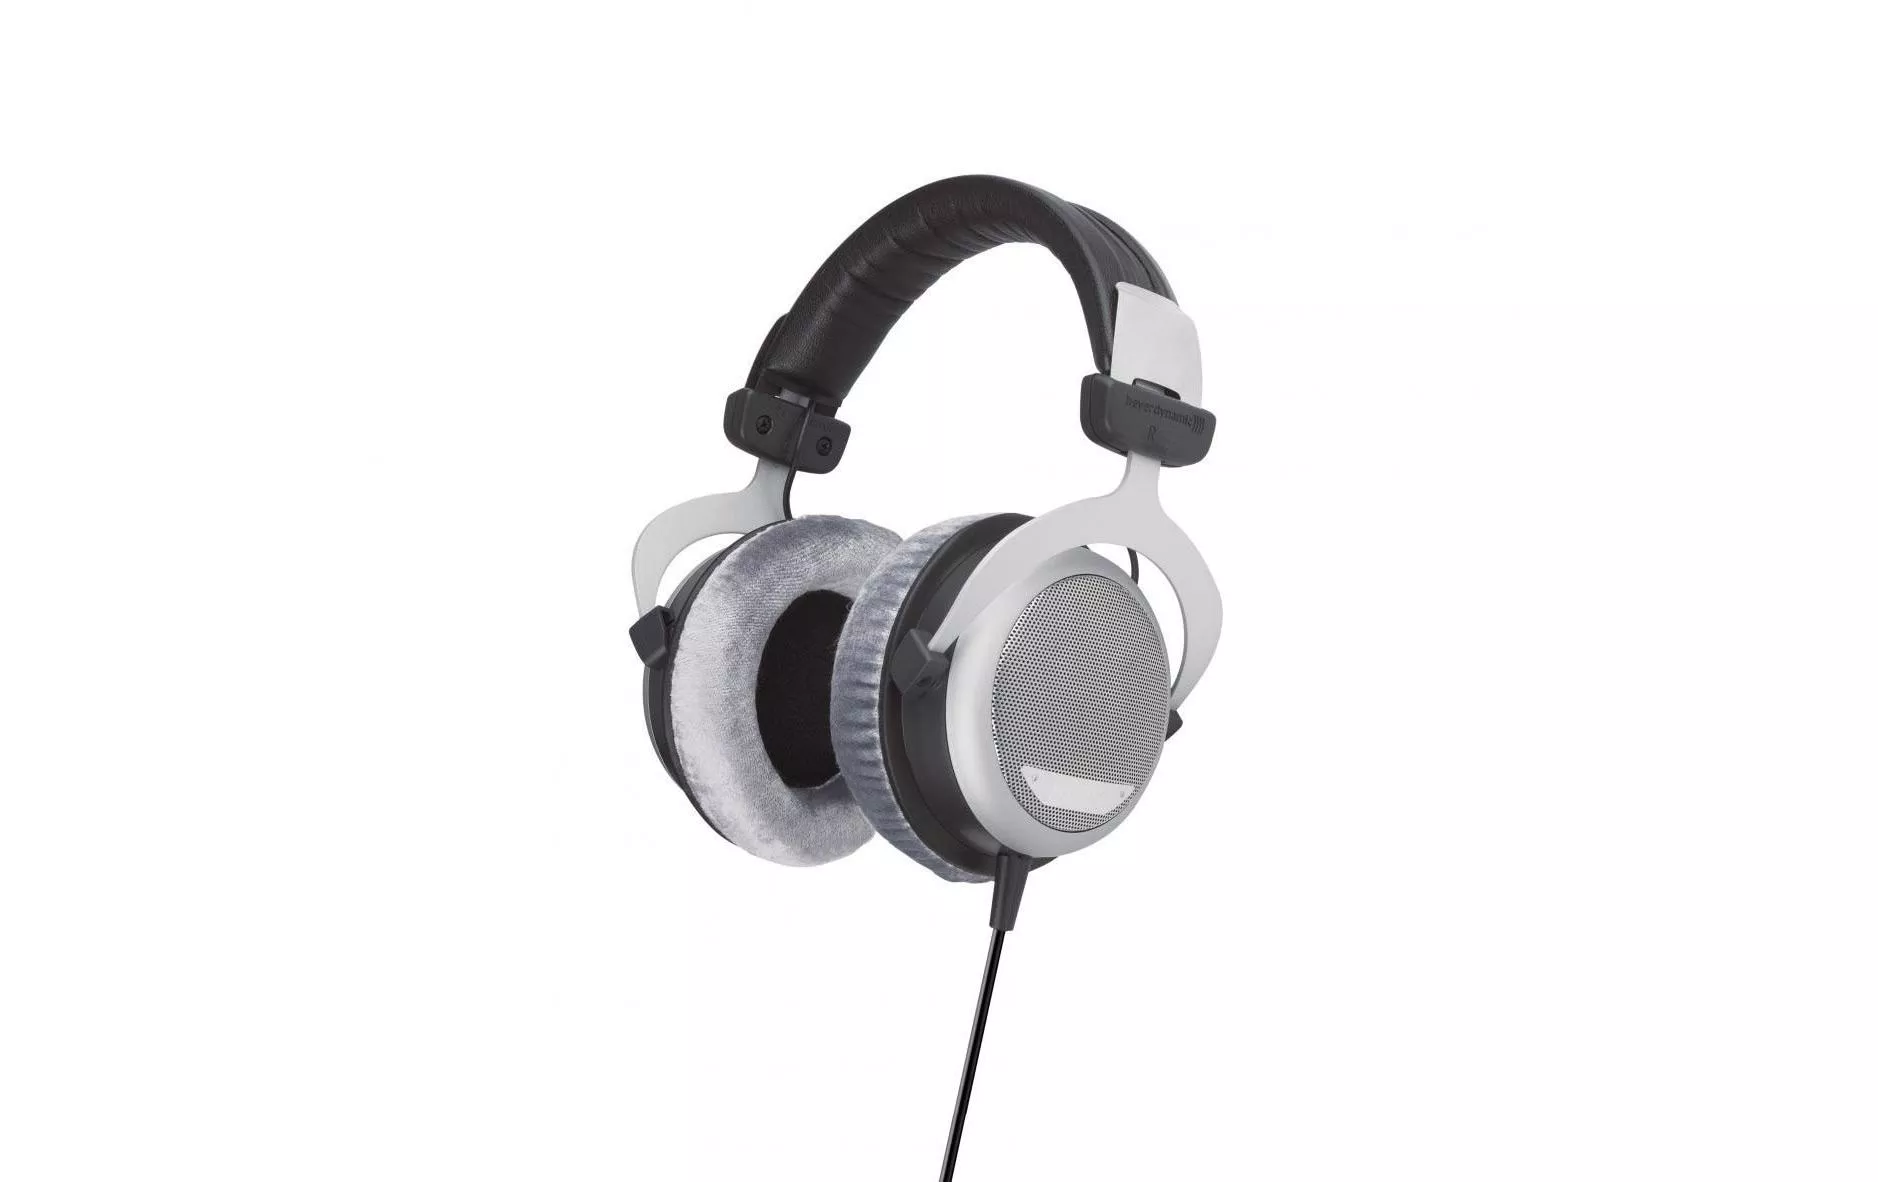 DT 880 Edition 32 Ω Cuffie over-ear, argento